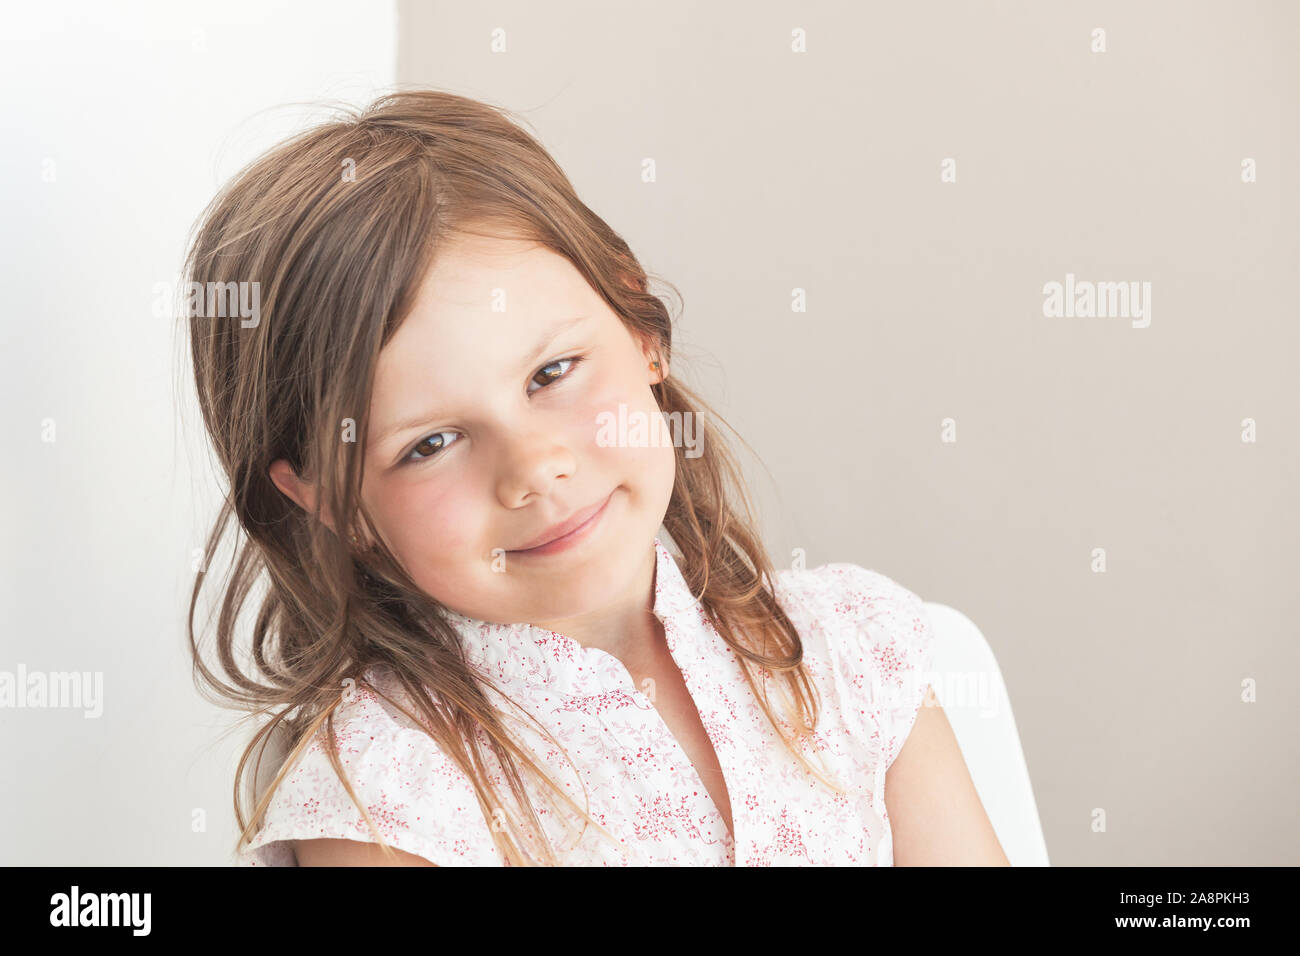 Smiling little blond Caucasian girl, close-up face portrait over gray wall background Stock Photo